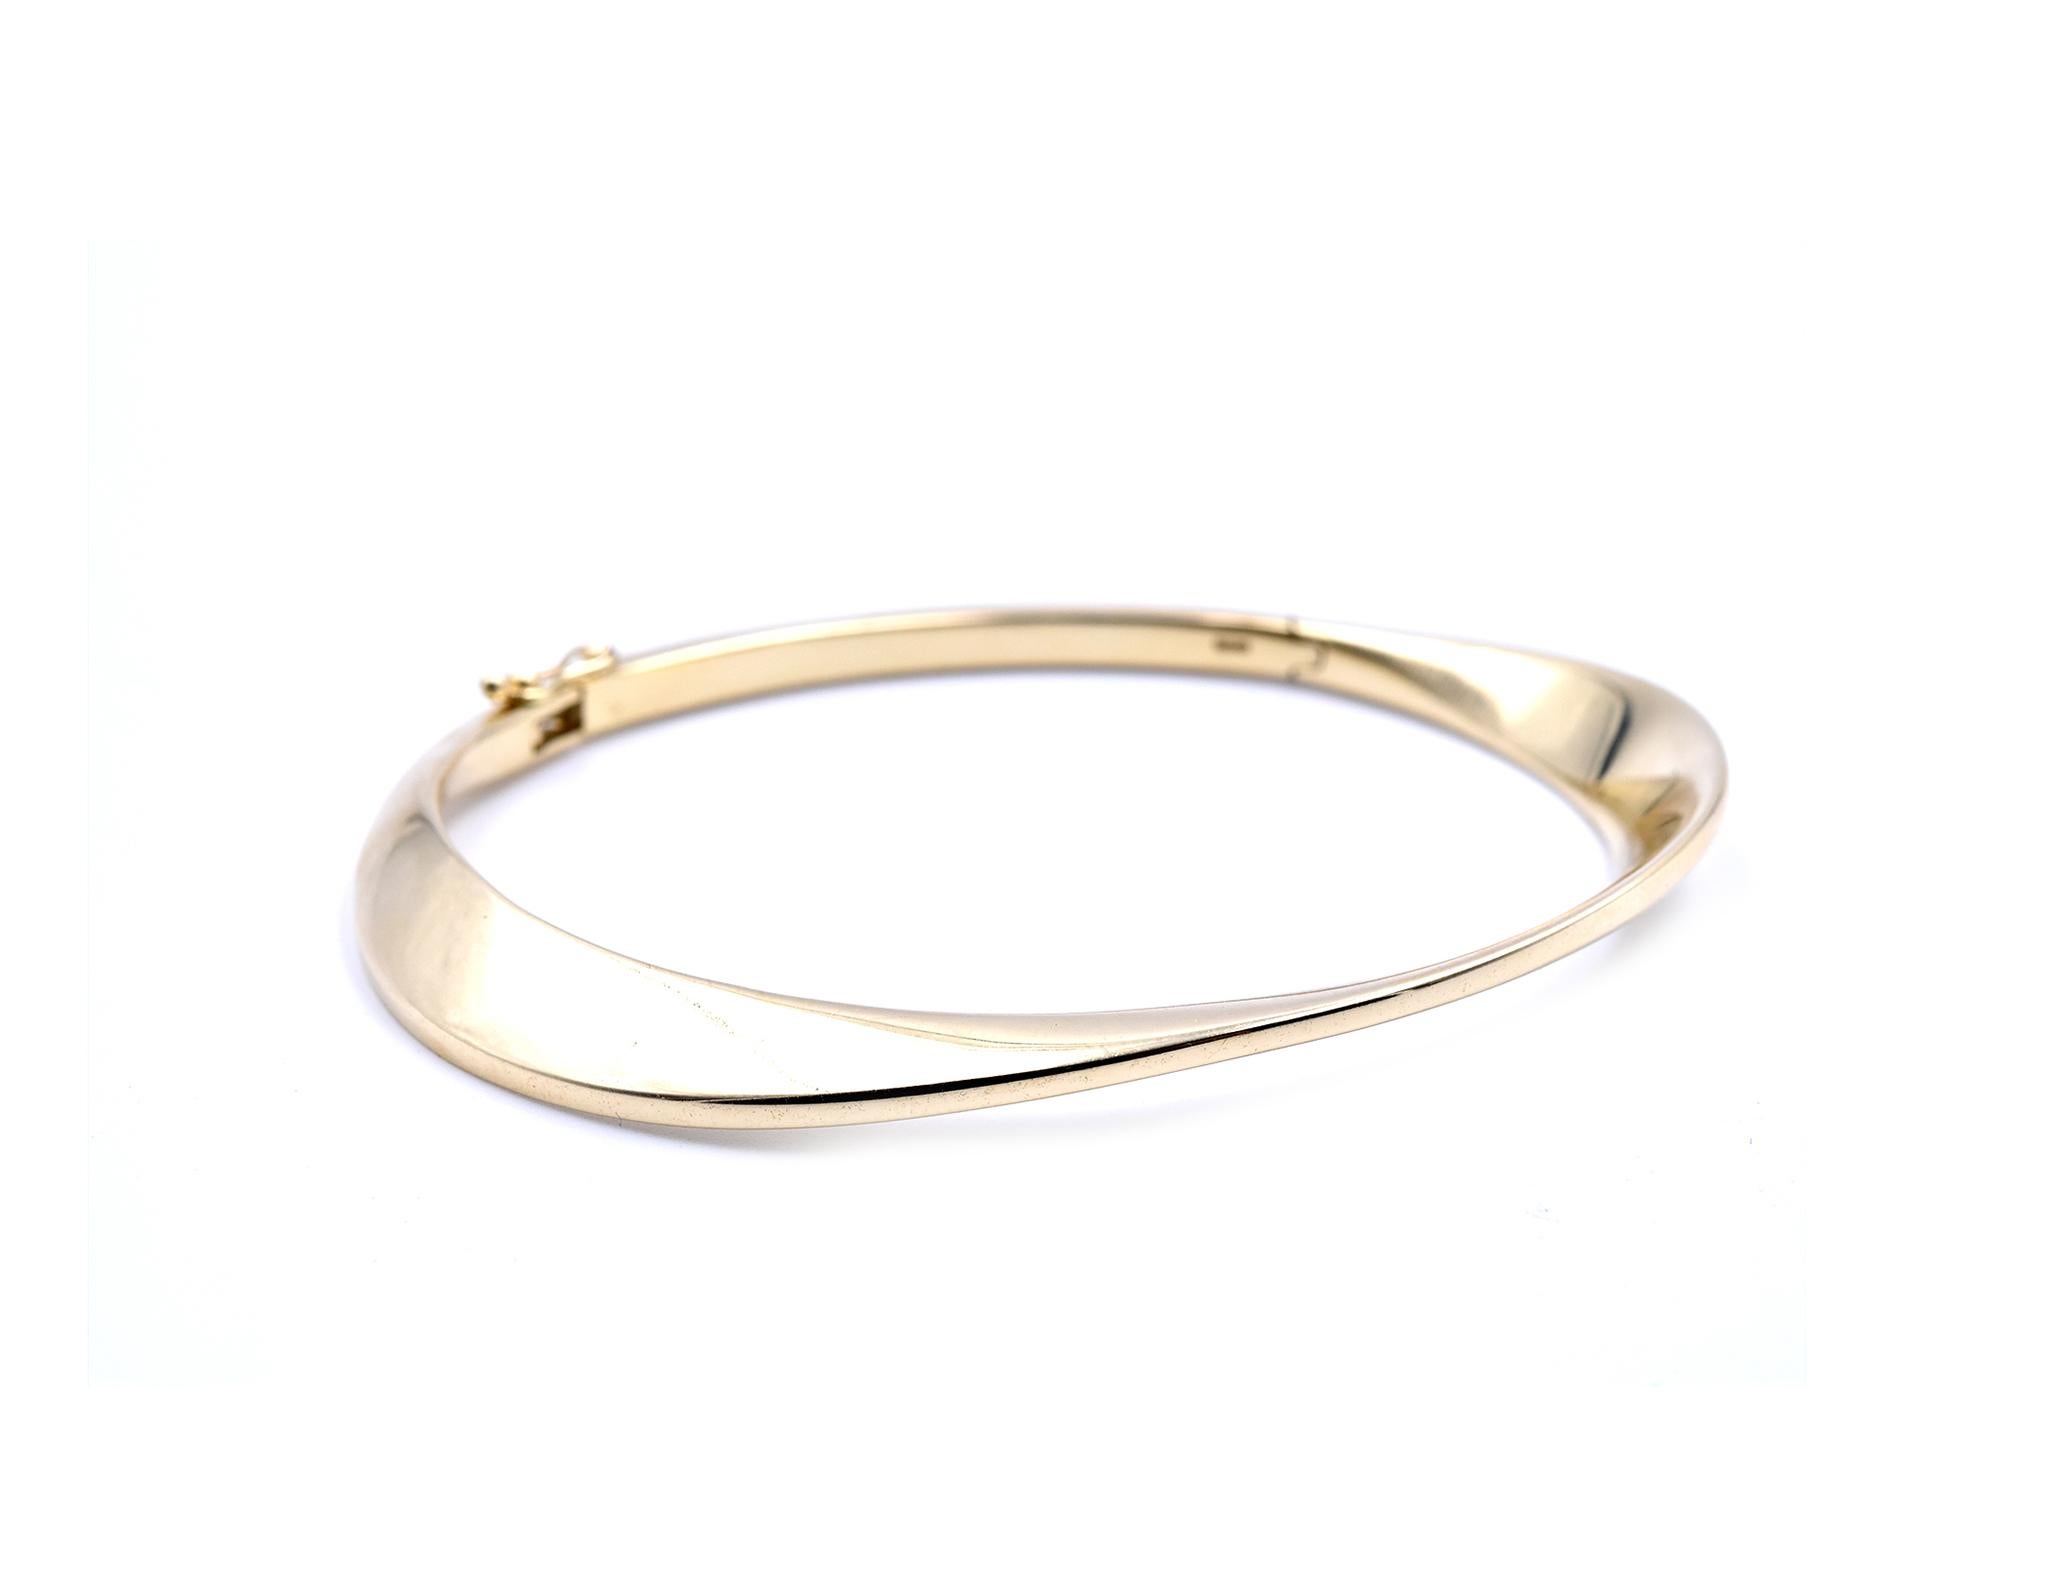 Designer: custom
Material: 14k yellow gold
Dimensions: bangle will fit 7” inch wrist and it is 7.56-8.24mm wide
Weight: 25.90 grams
